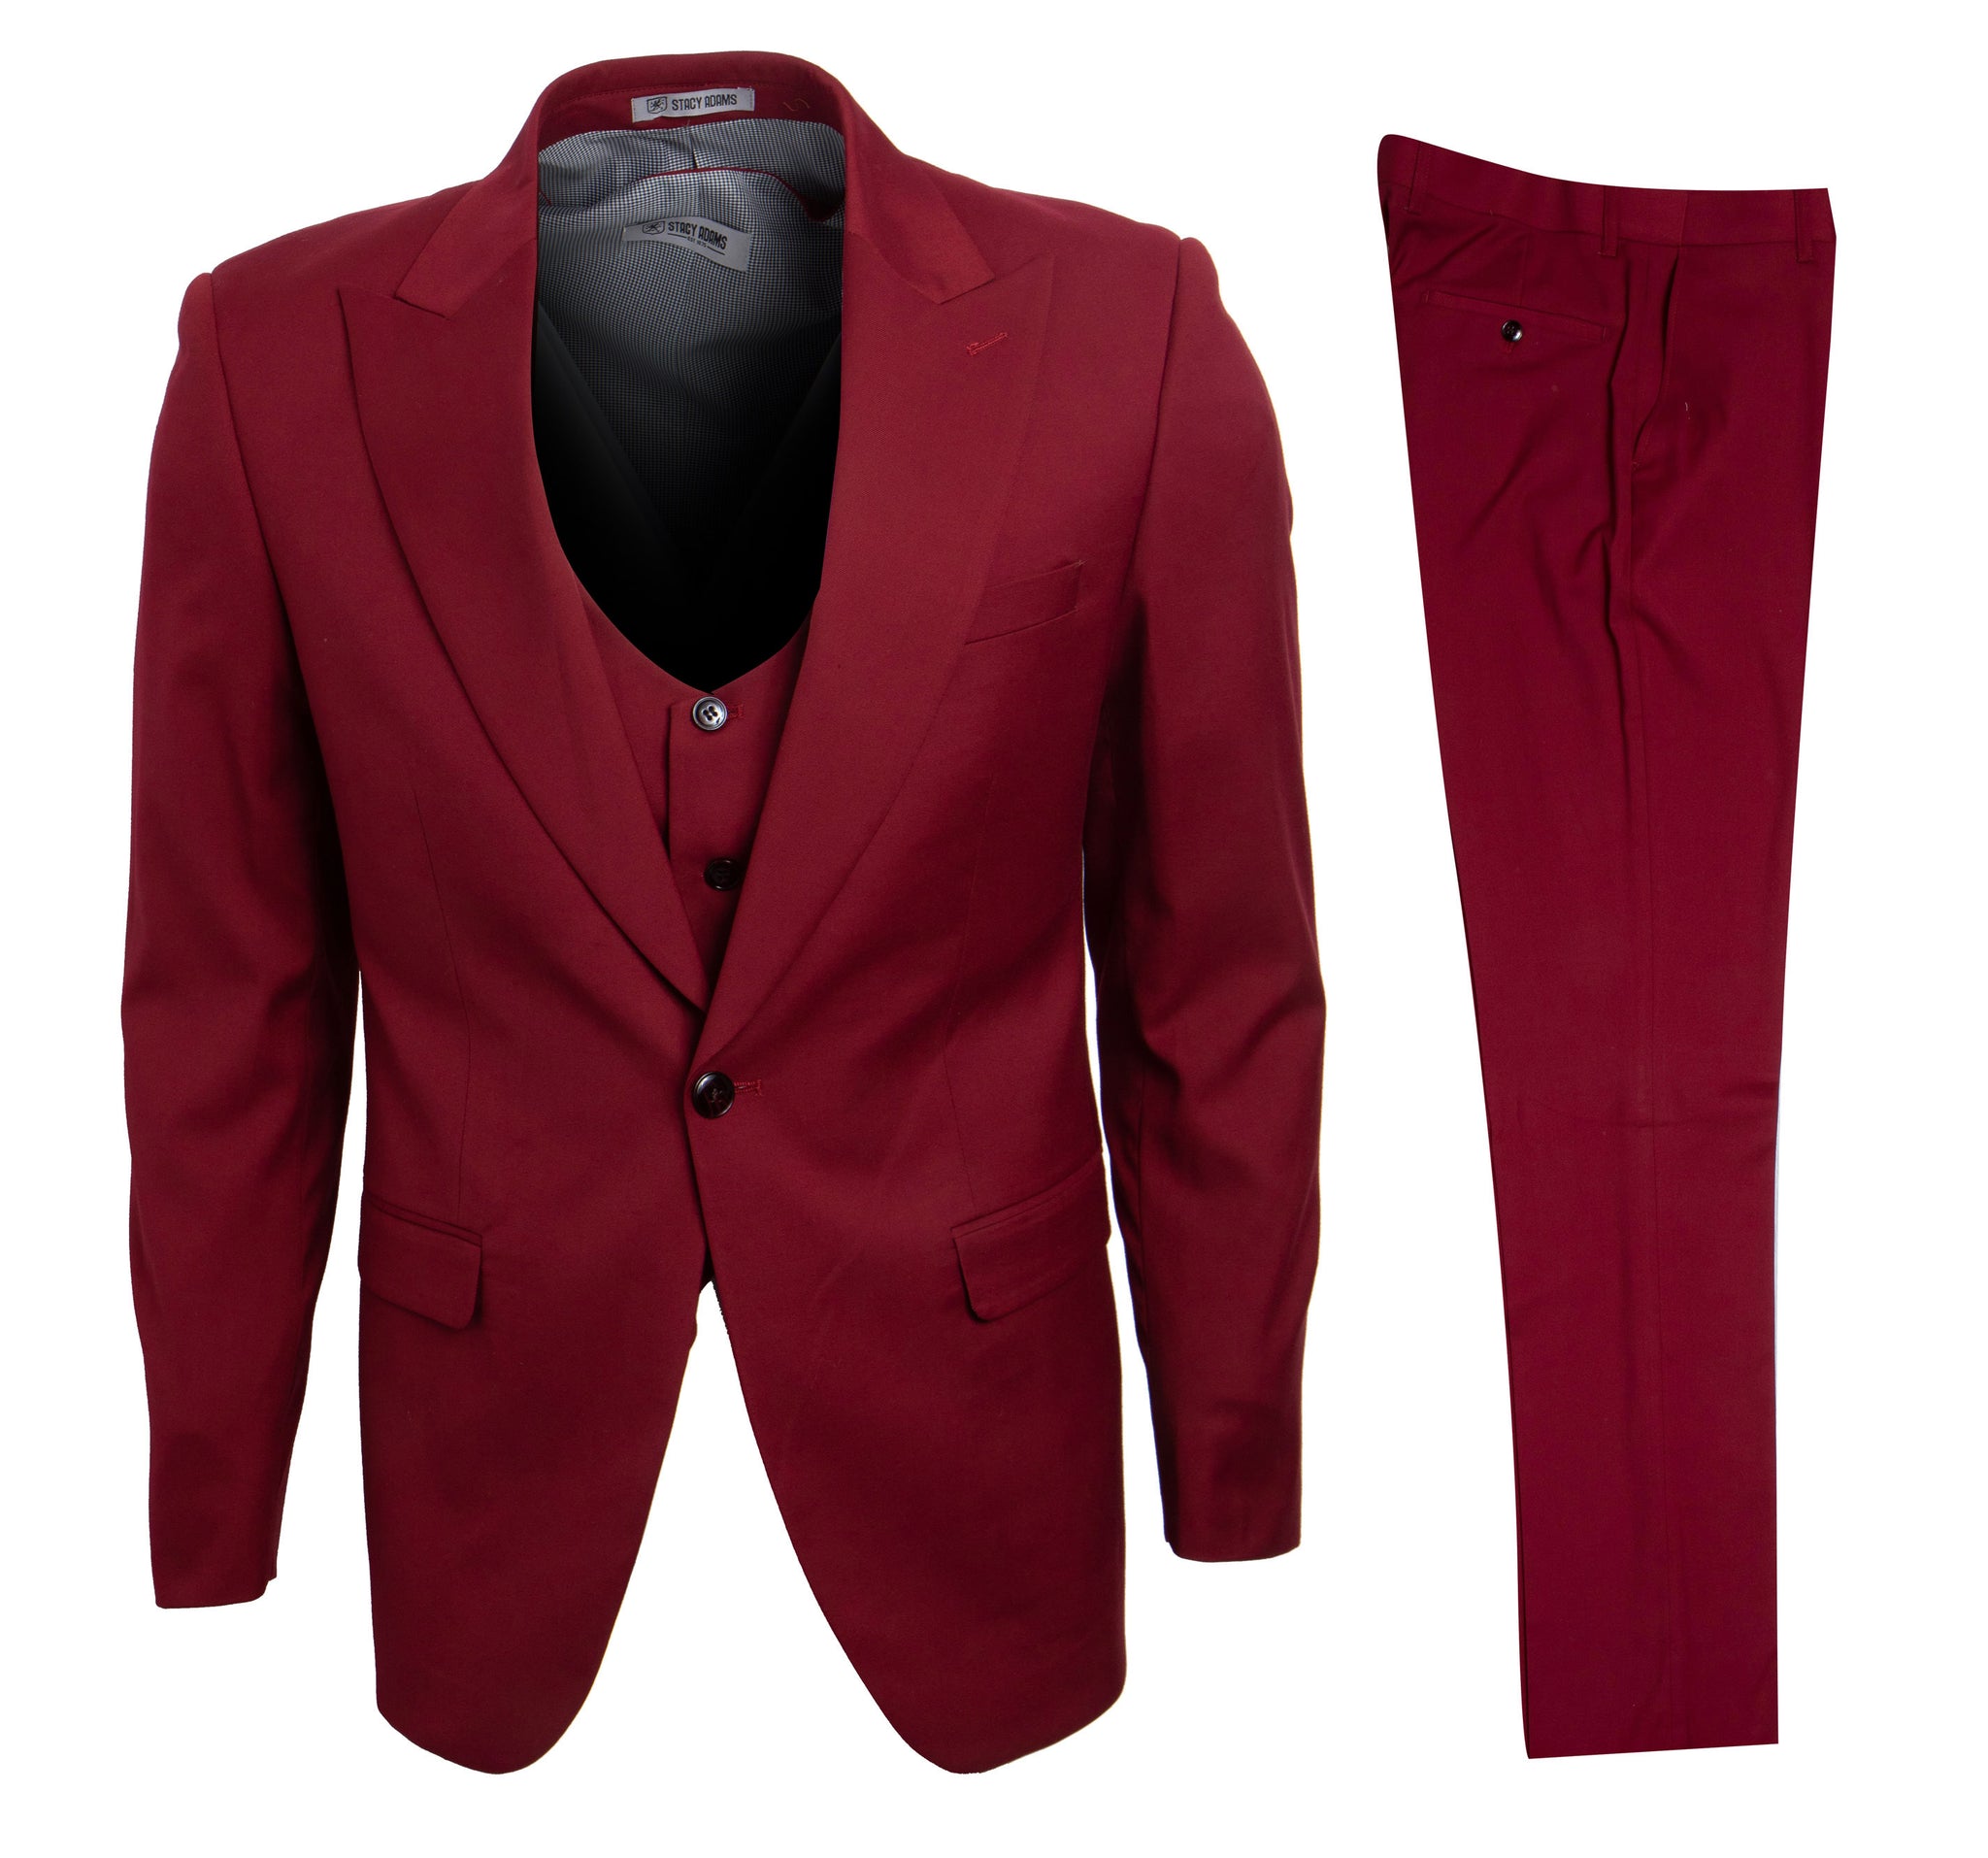 D&K Menswear Cherry Red Stacy Adams Suit on display